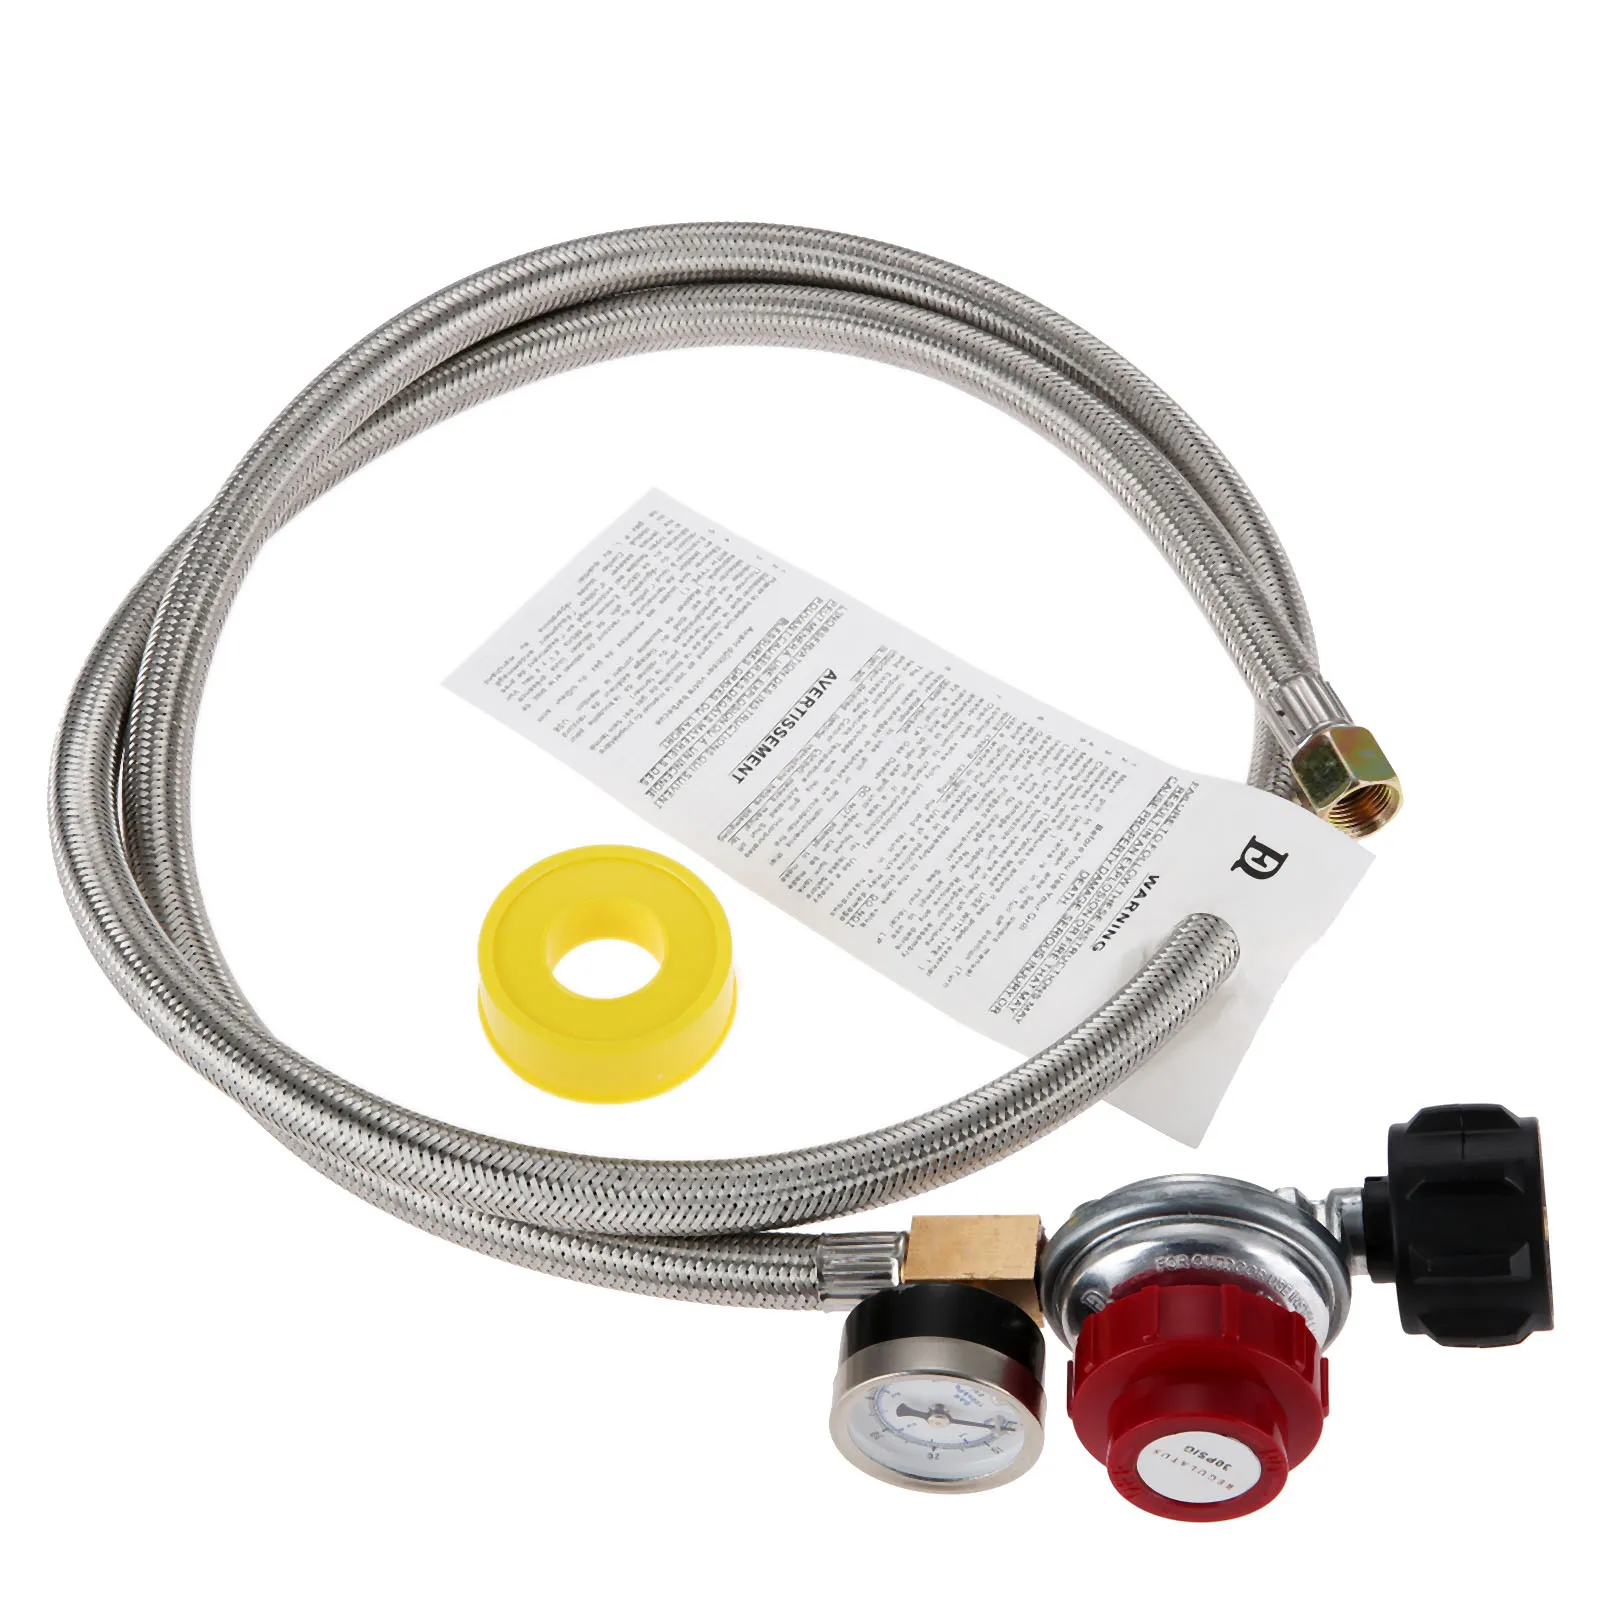 

0-30 PSI High Pressure Propane Regulator +Steel Braided Hose& Gauge QCC1/Type1 to 3/8" Female Flare for BBQ Fire Pit Gas Stove